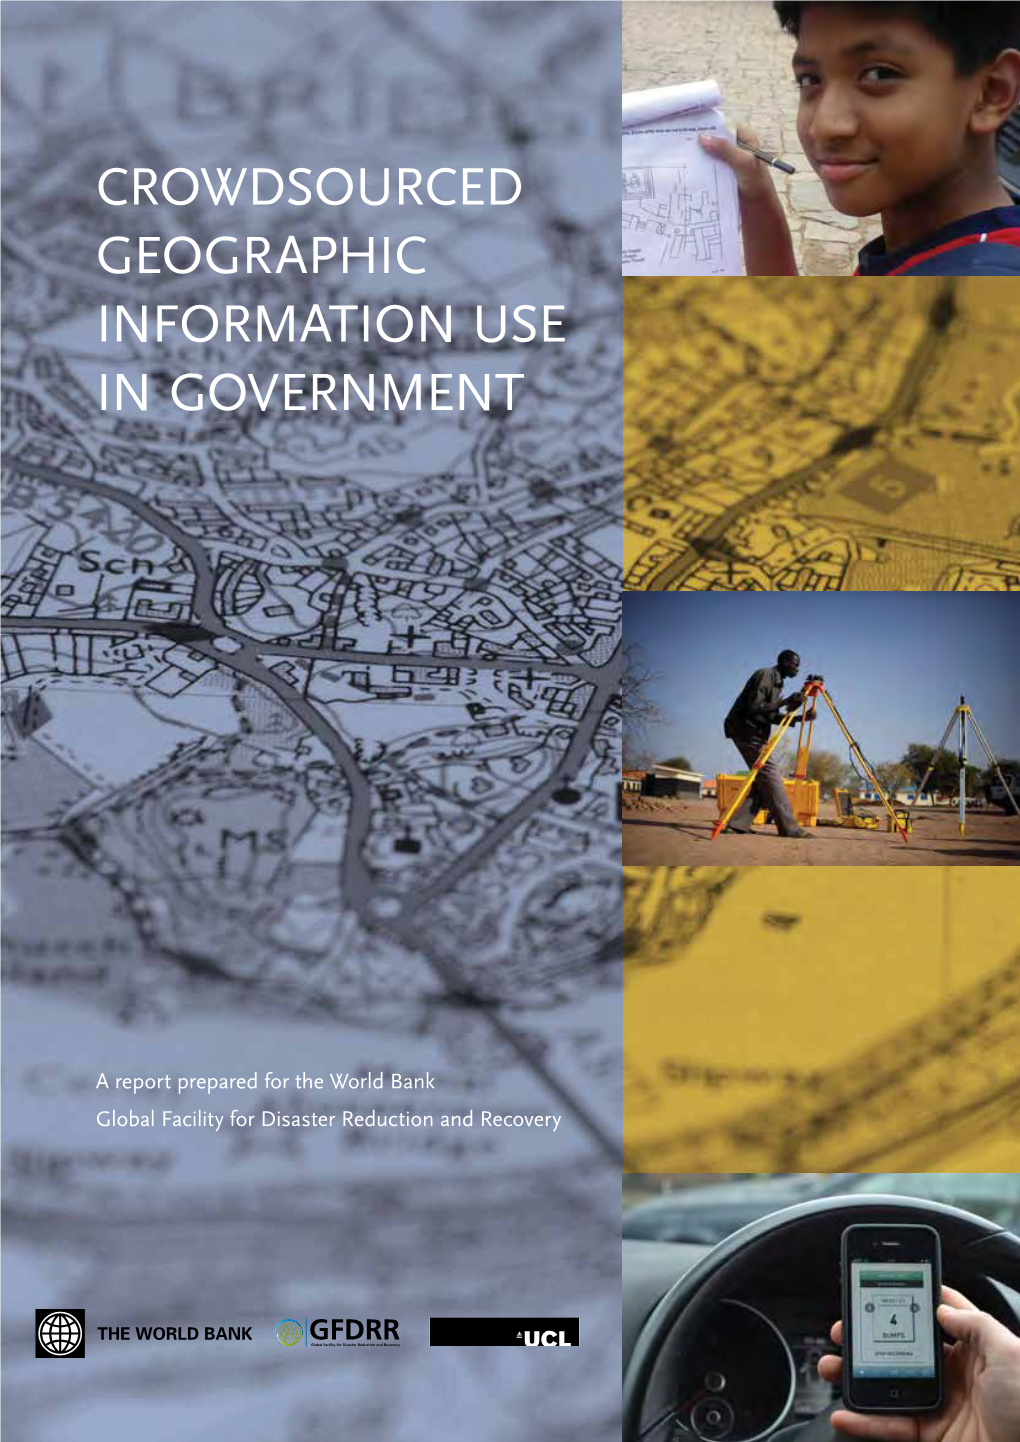 Crowdsourced Geographic Information Use in Government